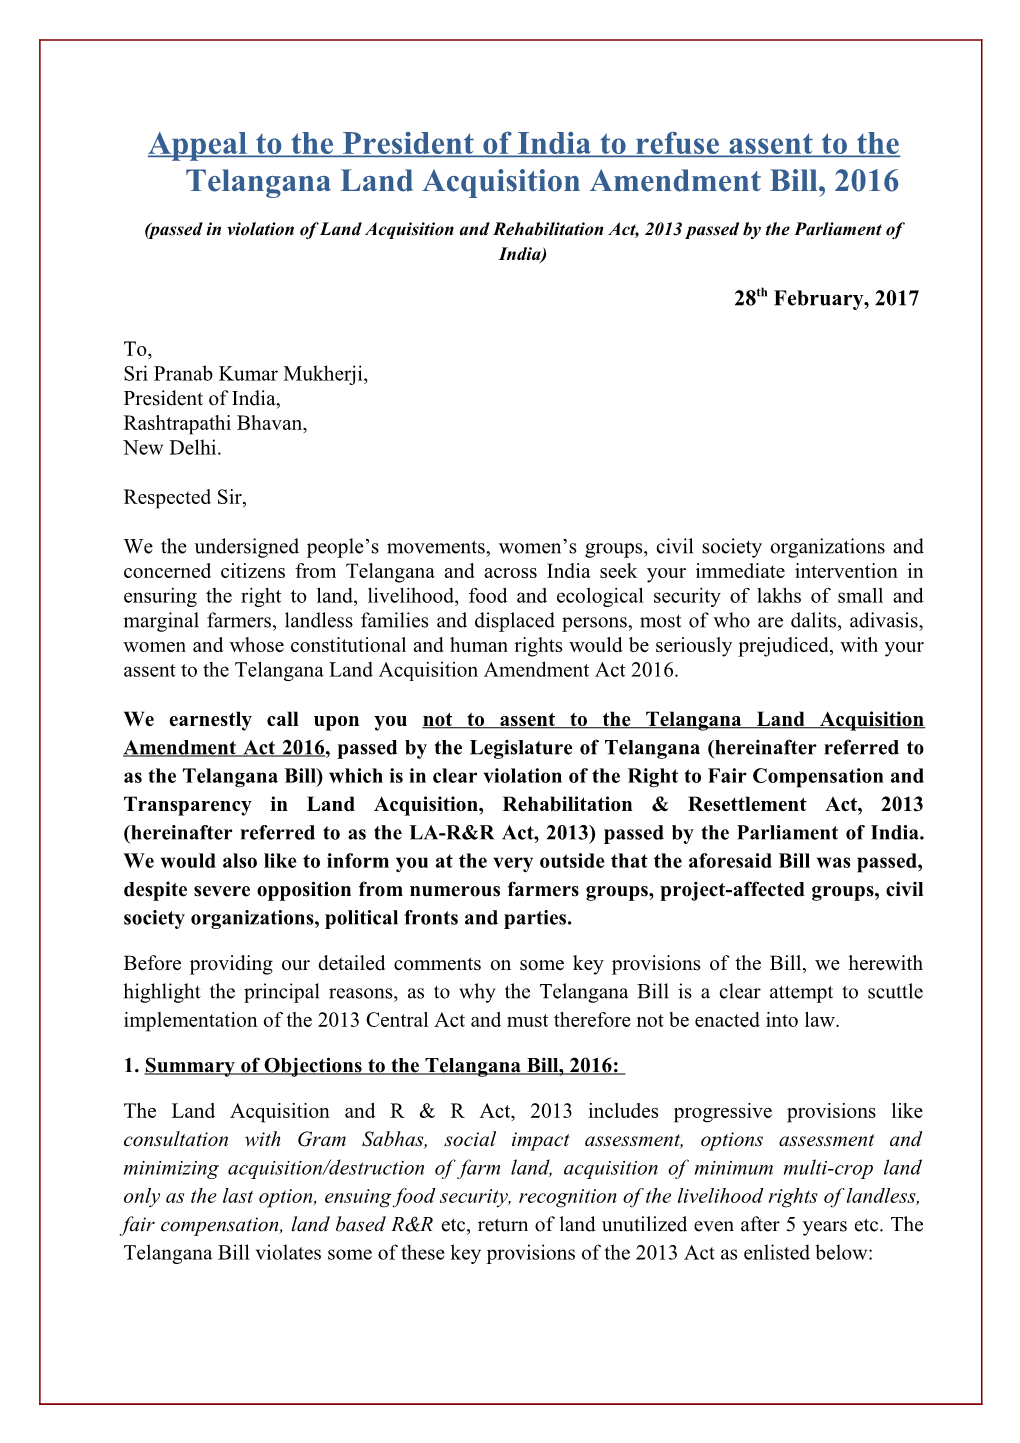 Appeal to the President of Indiato Refuse Assent to Thetelangana Land Acquisition Amendment